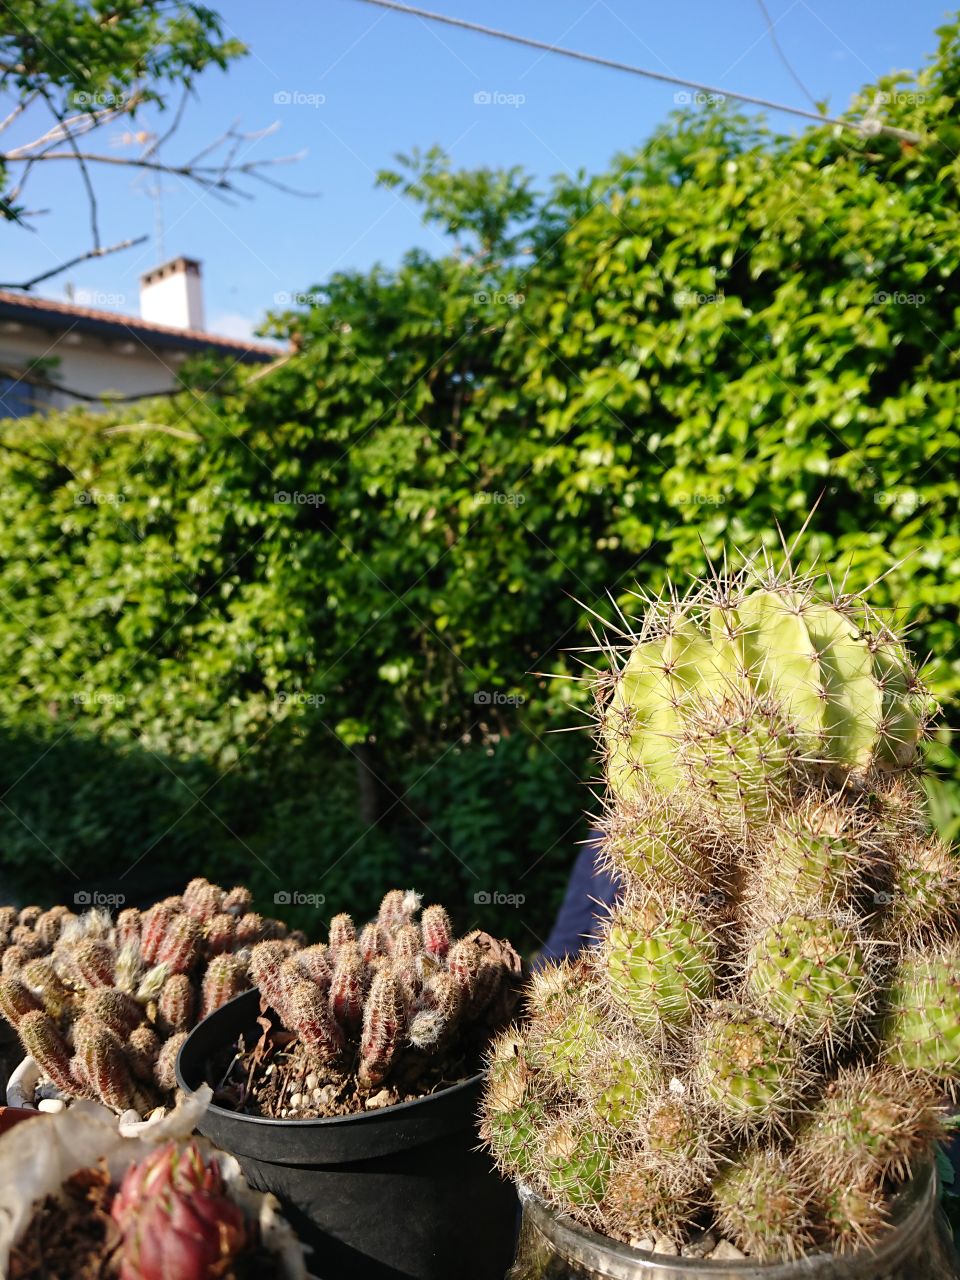 cactus in the garden with plants with colorful 2